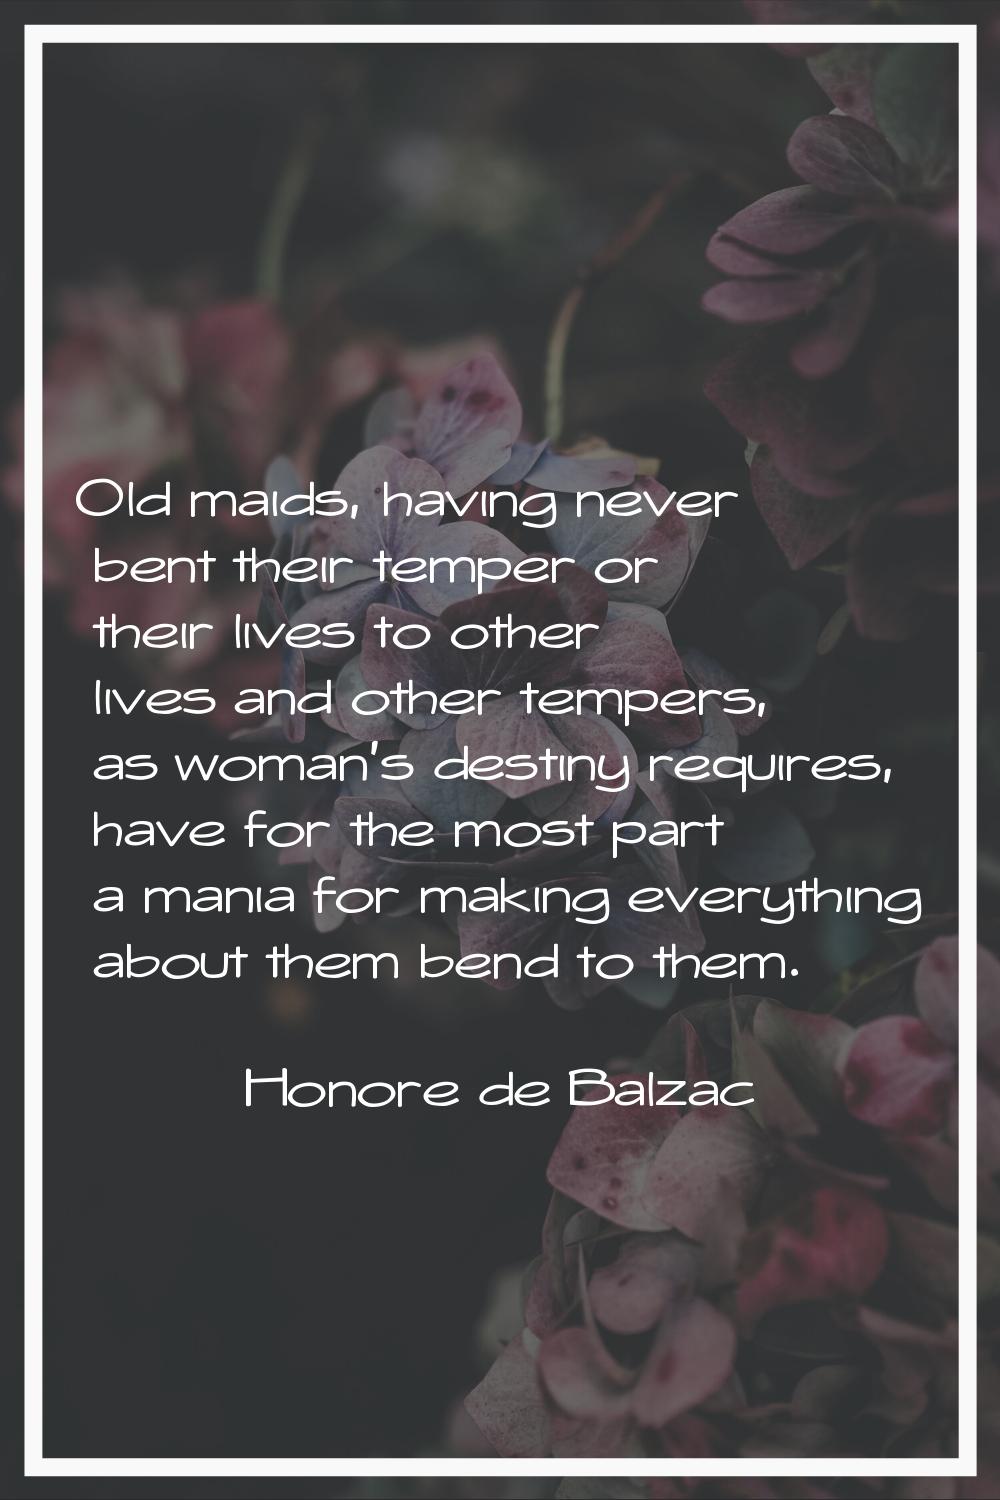 Old maids, having never bent their temper or their lives to other lives and other tempers, as woman